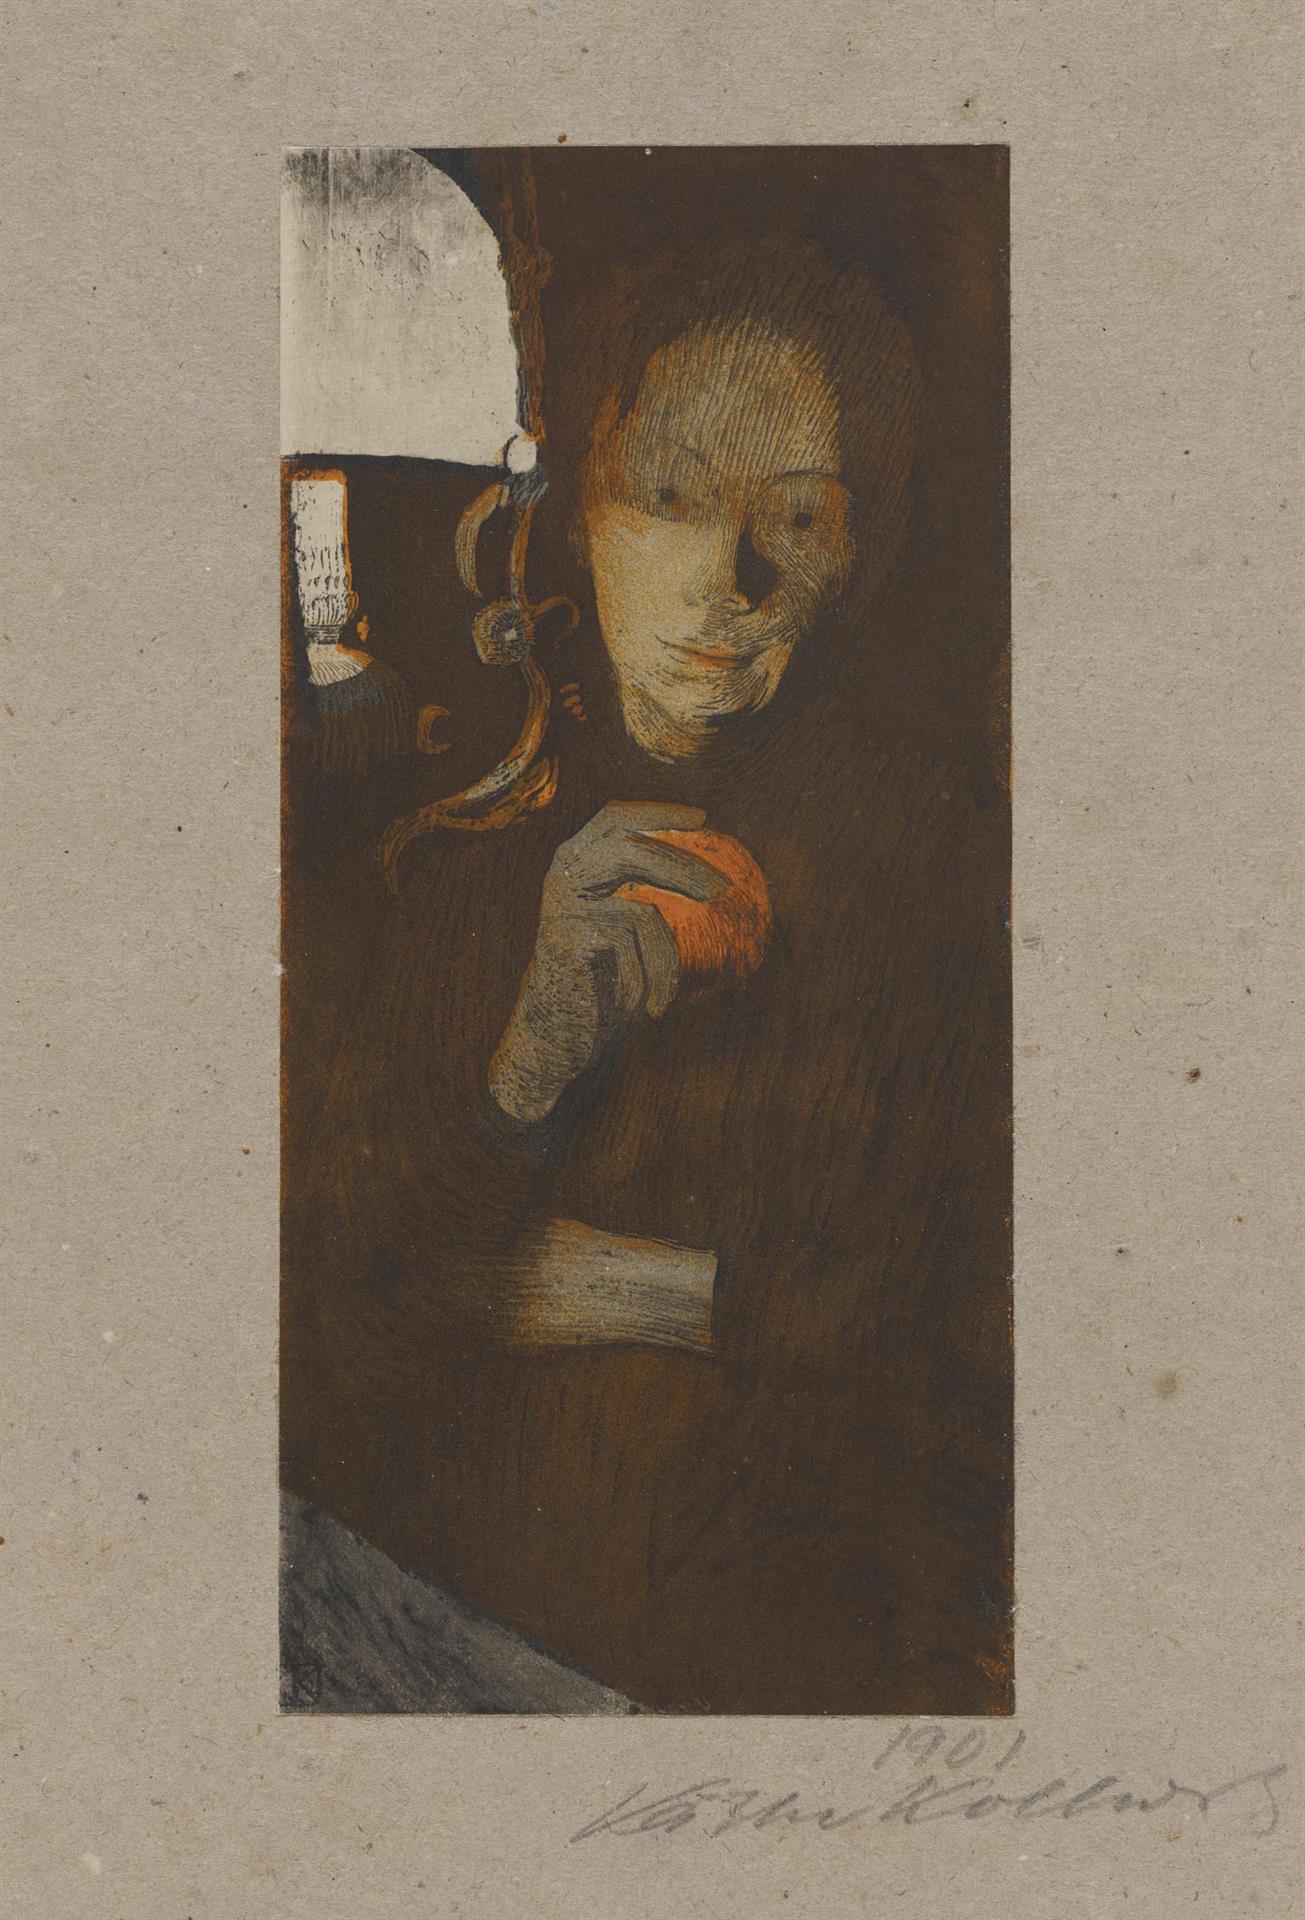 Käthe Kollwitz, Woman with Orange, 1901, brush lithograph with colouring stone in orange, etching (aquatint, reservage and drypoint) slightly edited with charcoal, cream-coloured paper laid on grey, blotter-like paper, Kn 56 II 2, Cologne Kollwitz Collection © Käthe Kollwitz Museum Köln